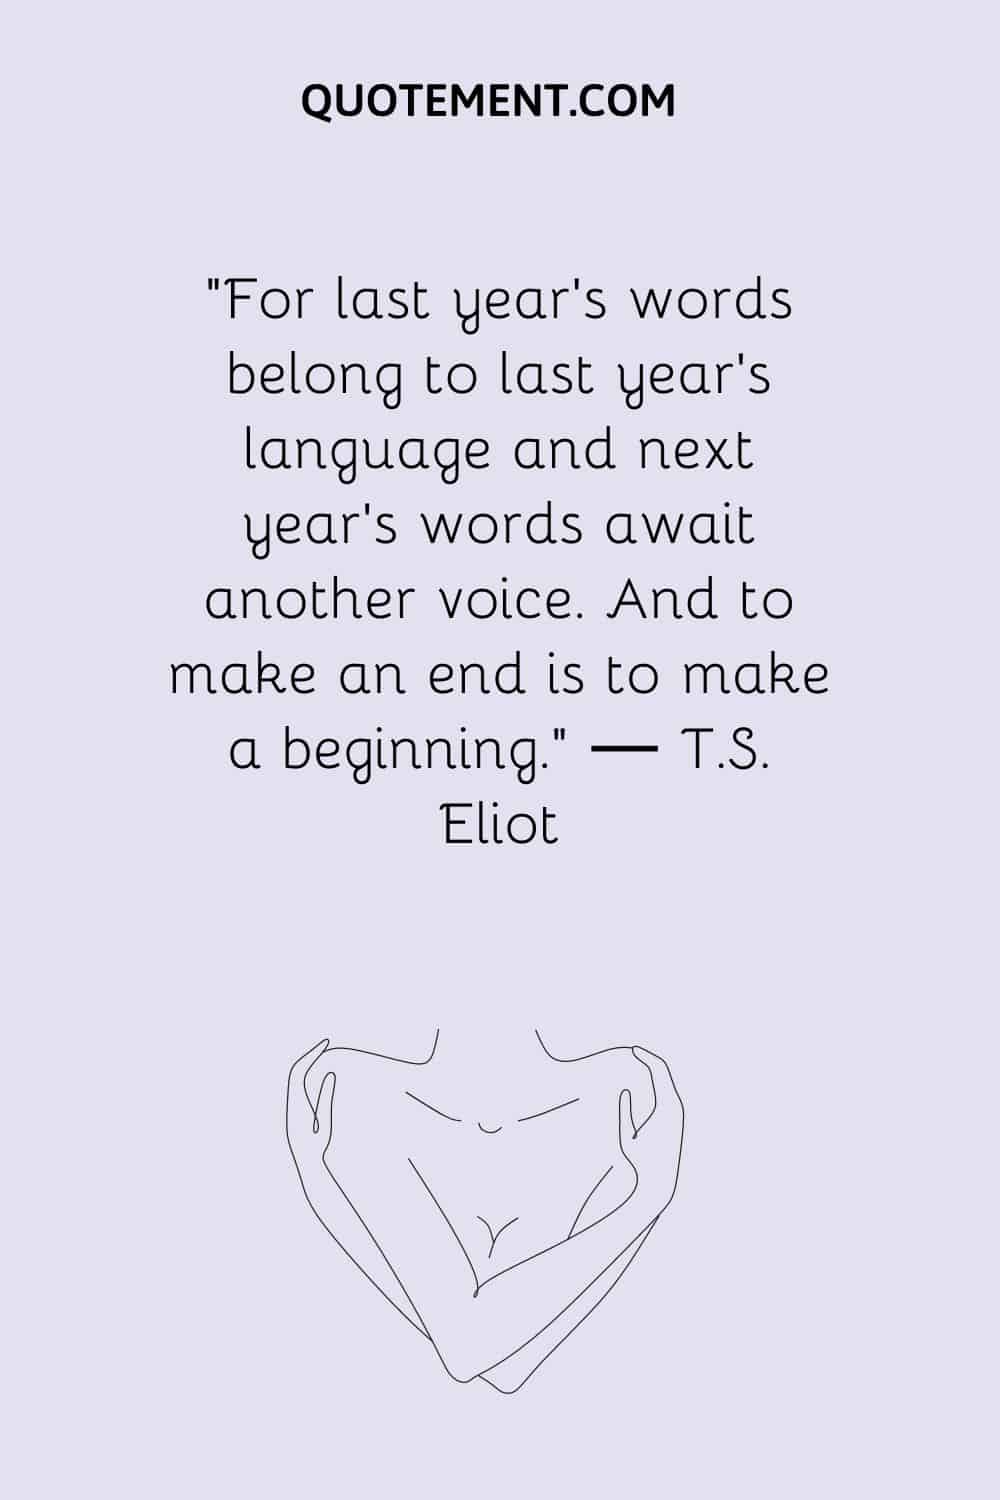 For last year’s words belong to last year’s language and next year’s words await another voice. And to make an end is to make a beginning